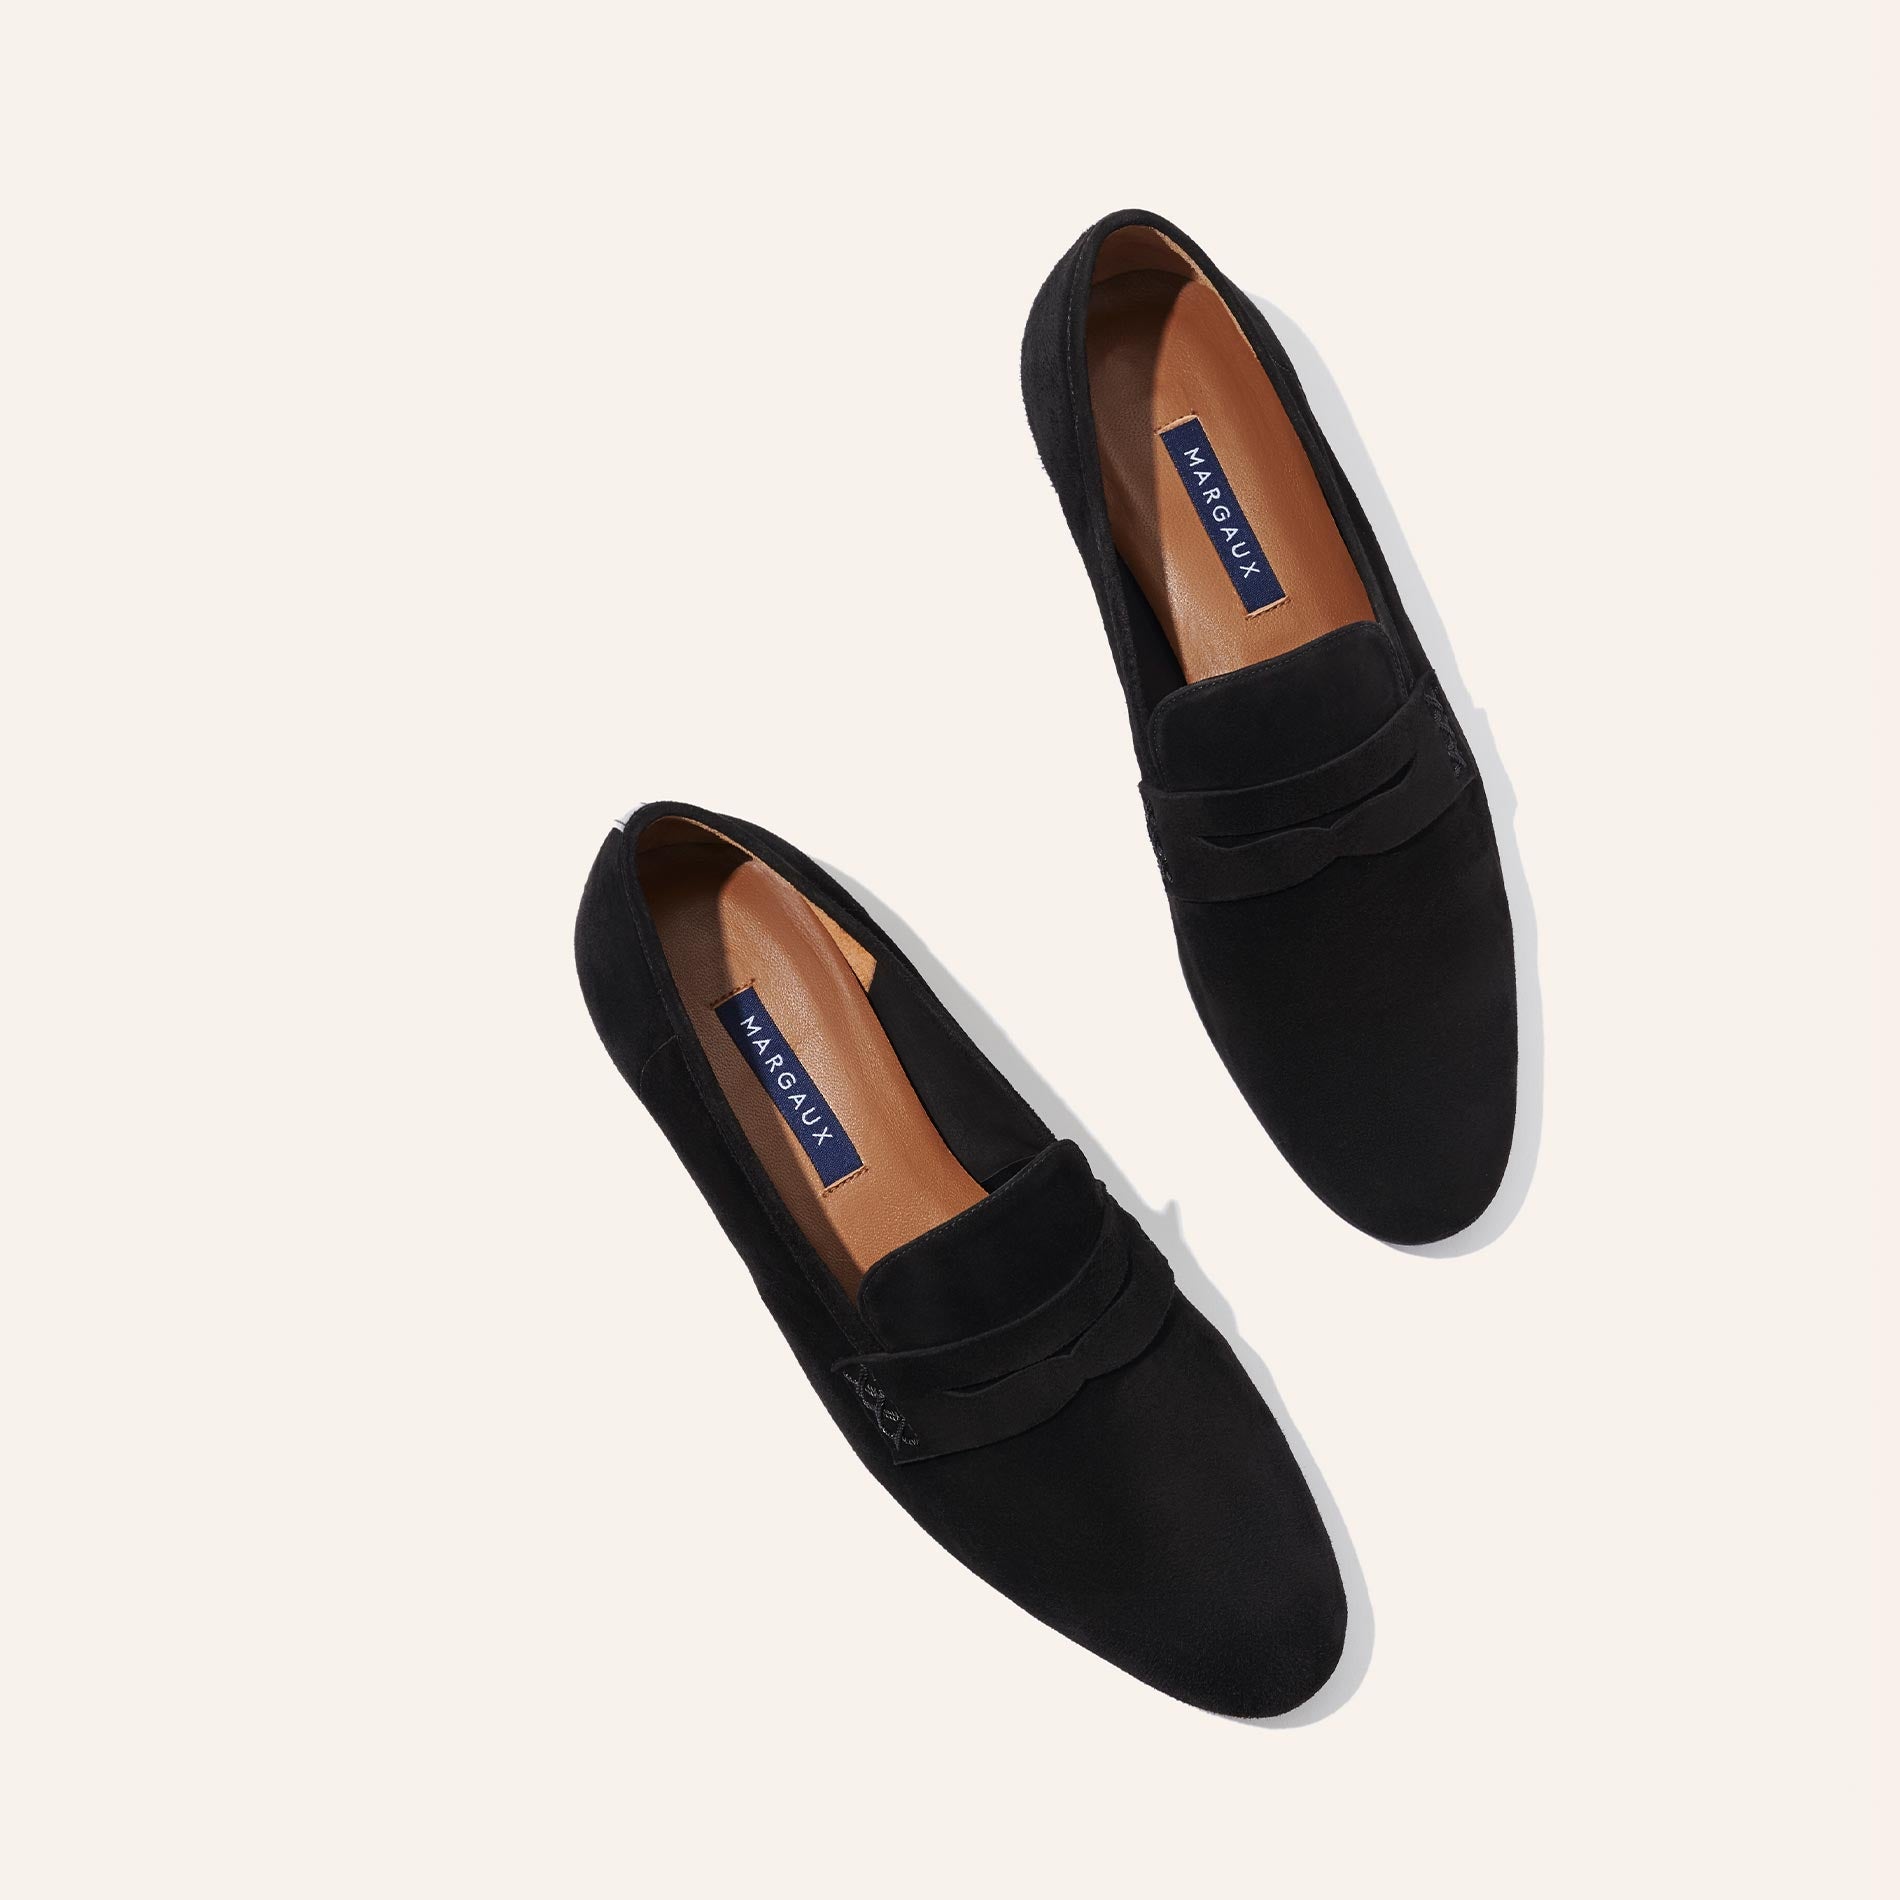 The - Black Suede – Margaux